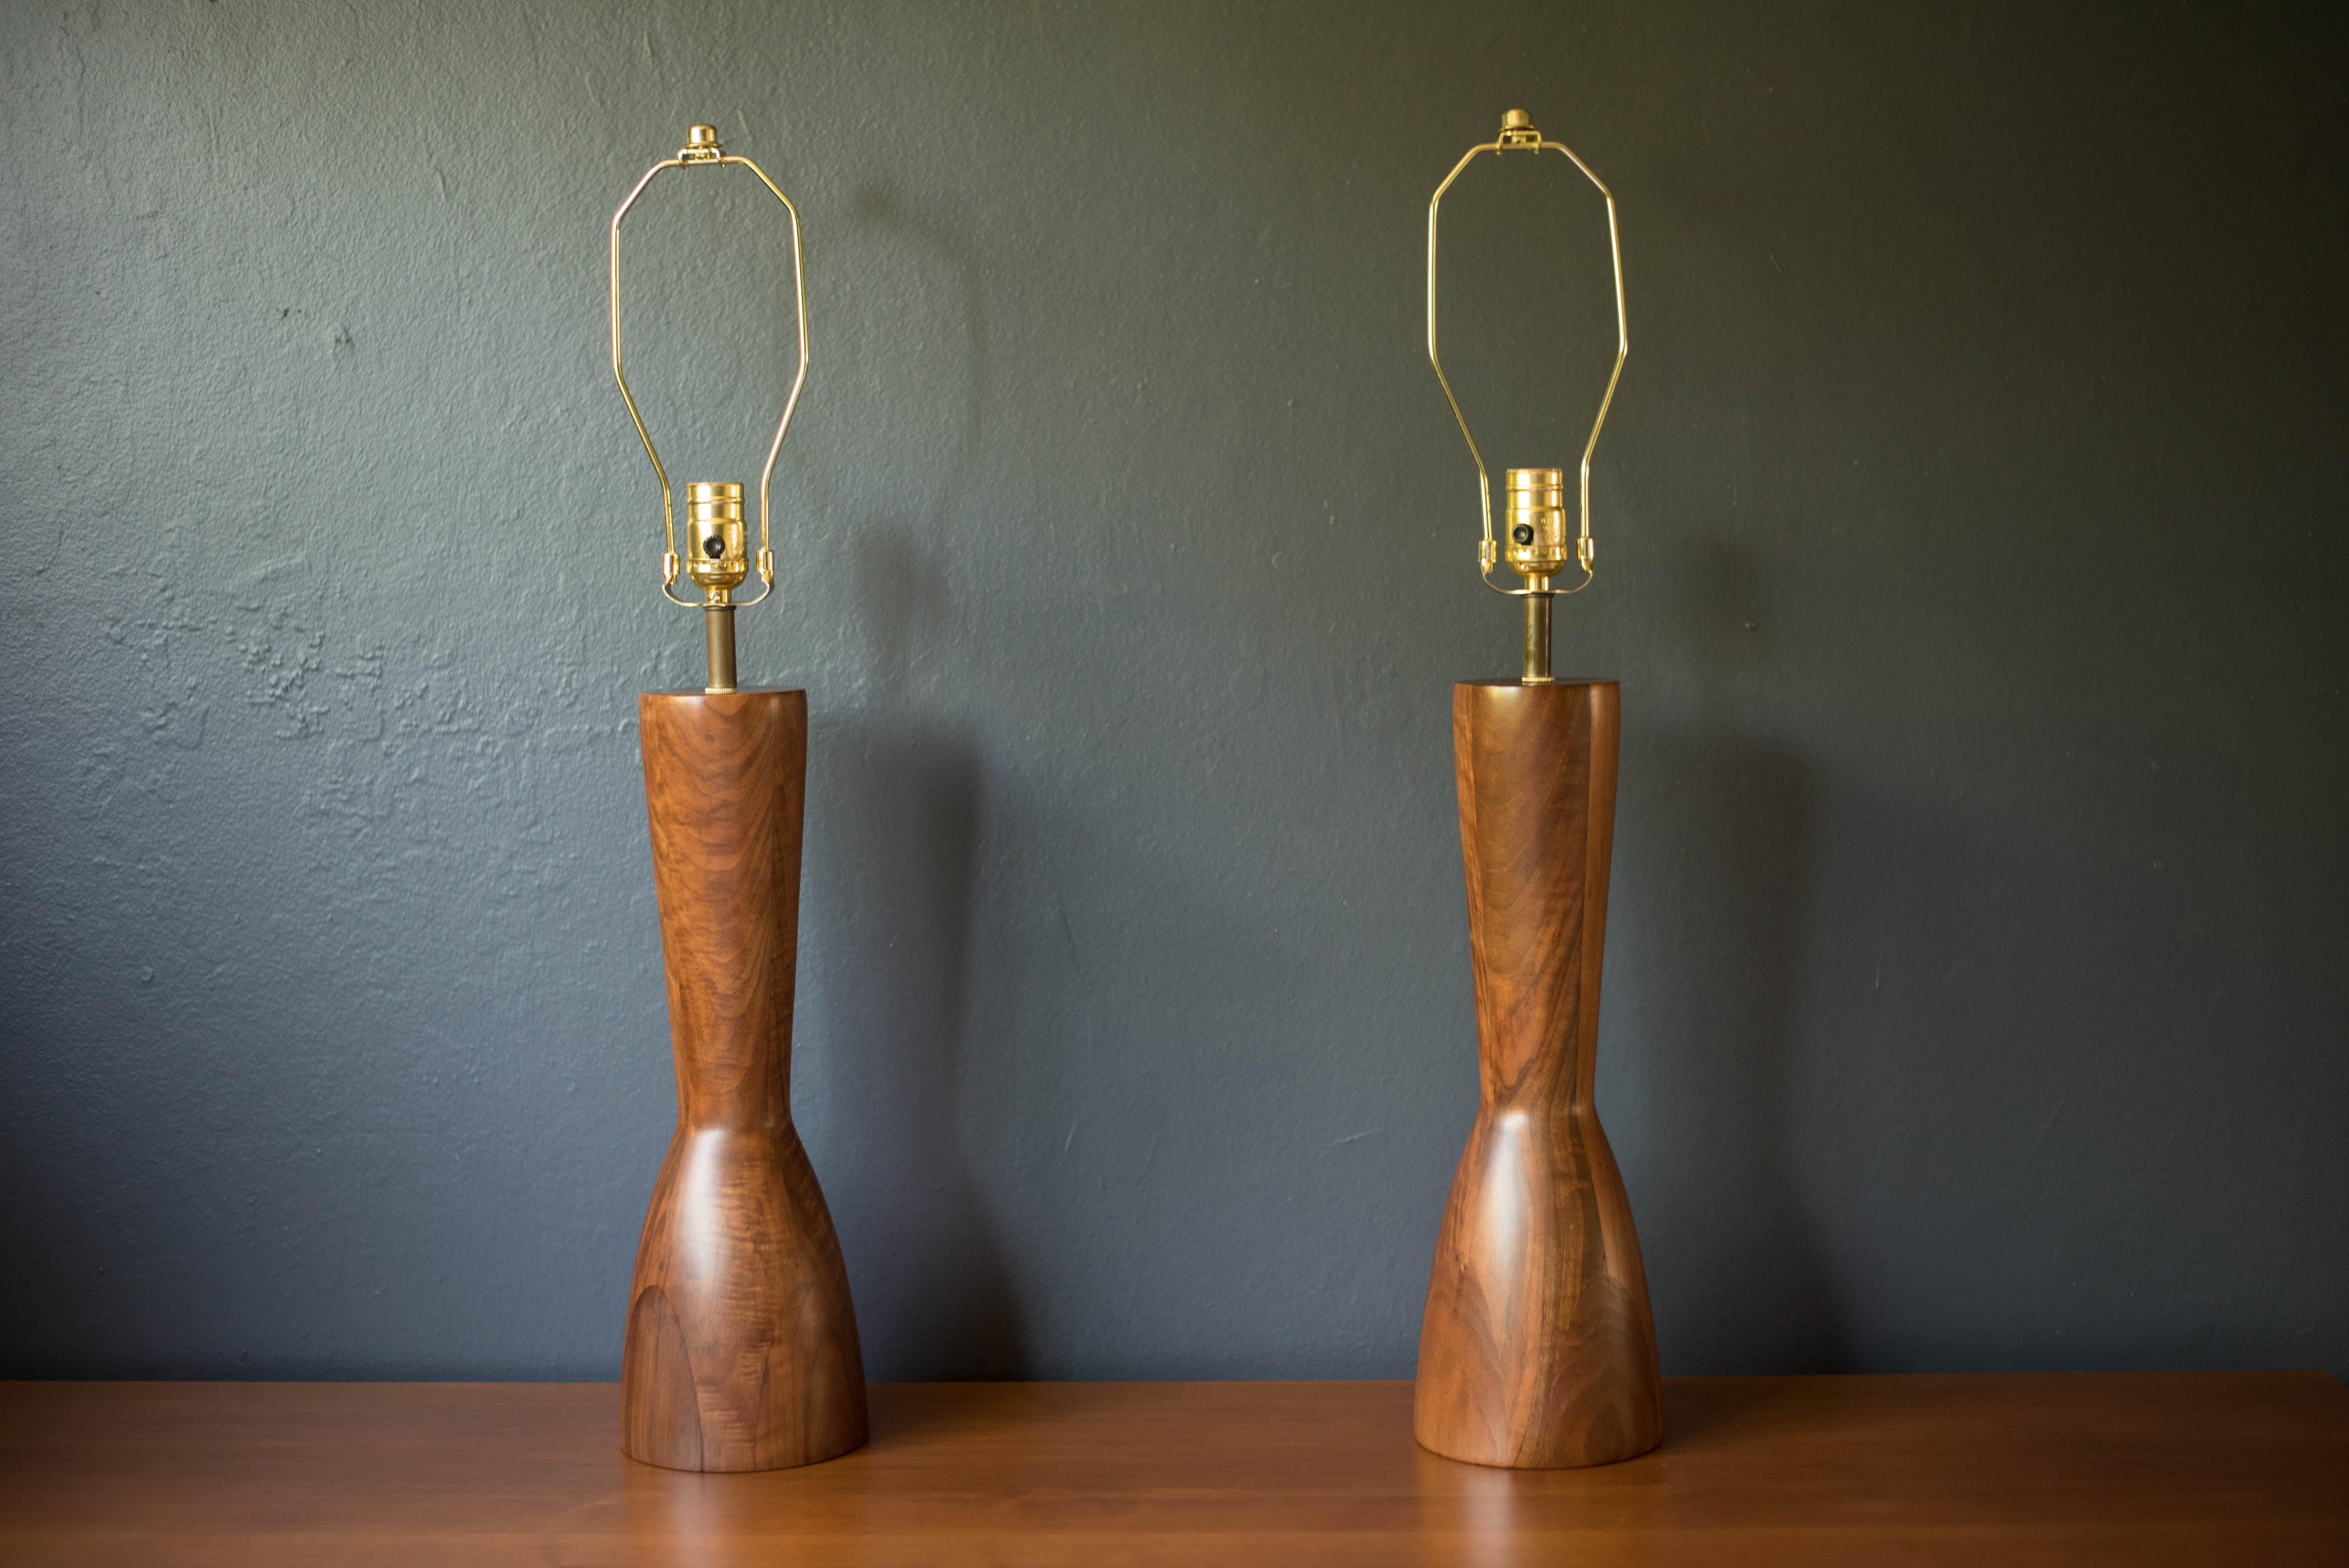 Vintage pair of solid staved walnut accent table lamps, circa 1960's. This lighting set features a unique sculptural shape accented with brass hardware and natural wood grains. Includes a three way switch mechanism. 

